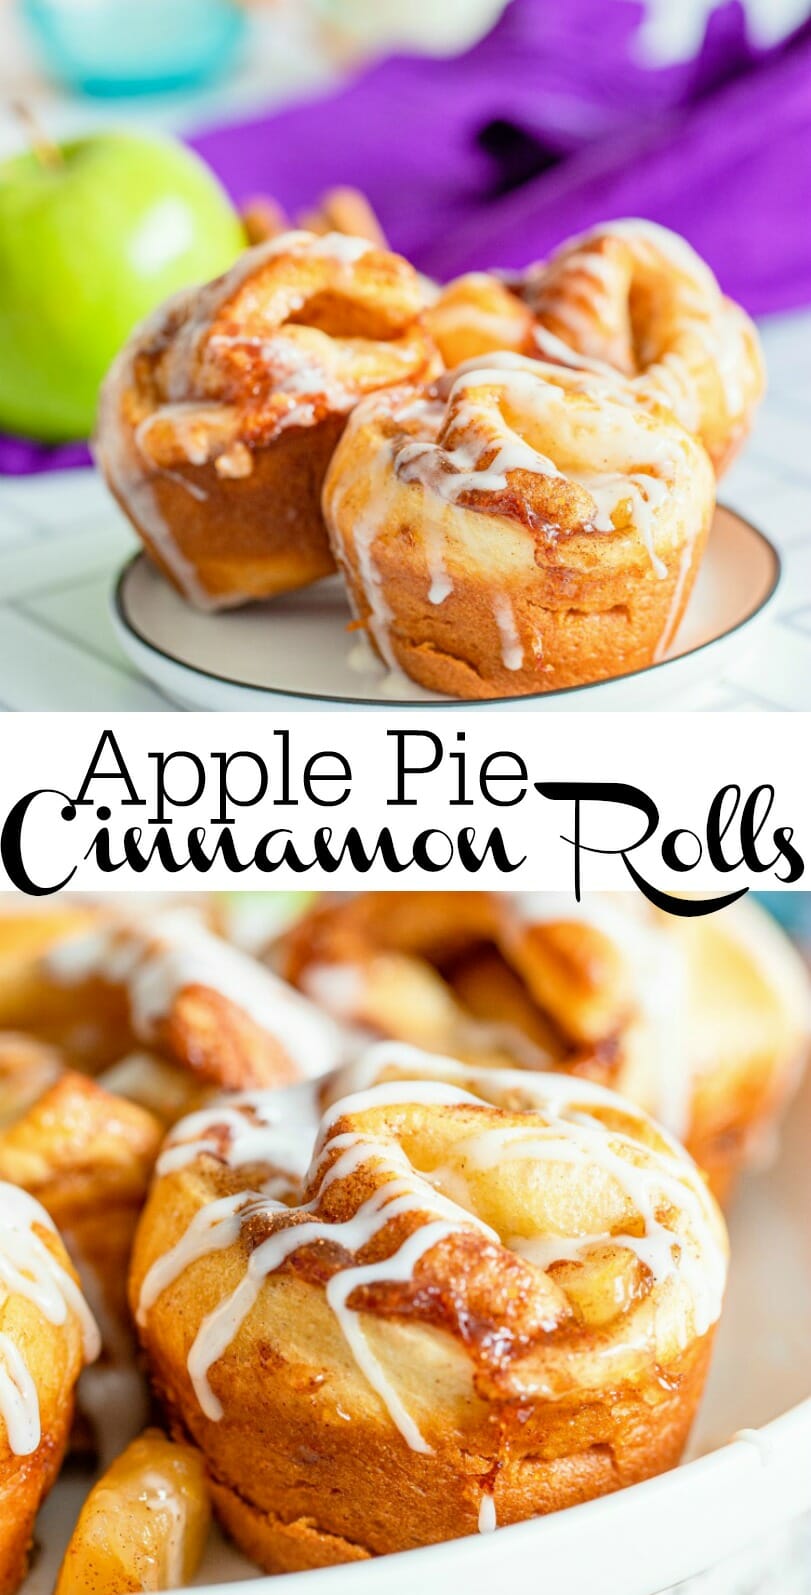 Easy Apple Pie Cinnamon Rolls made with Crescent Dough